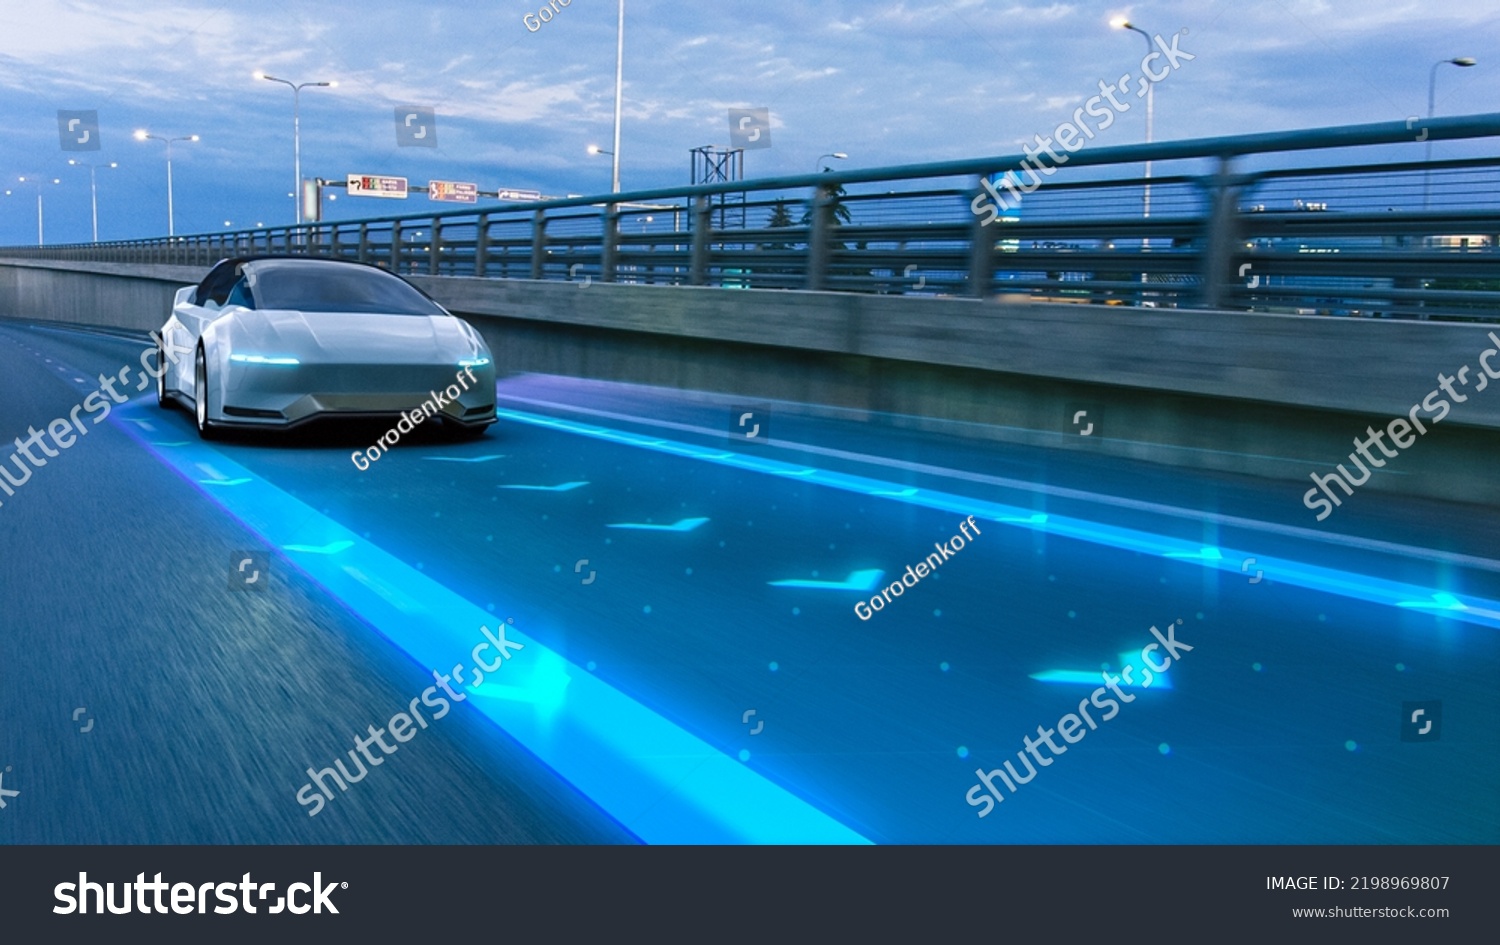 Autonomous Self-Driving 3D Car Moving Through City Highway. VFX Visualization Concept: Software Sensor Scanning Road Ahead for Vehicles, Danger, Speed Limits. Day Urban Driveway. Front Following View #2198969807